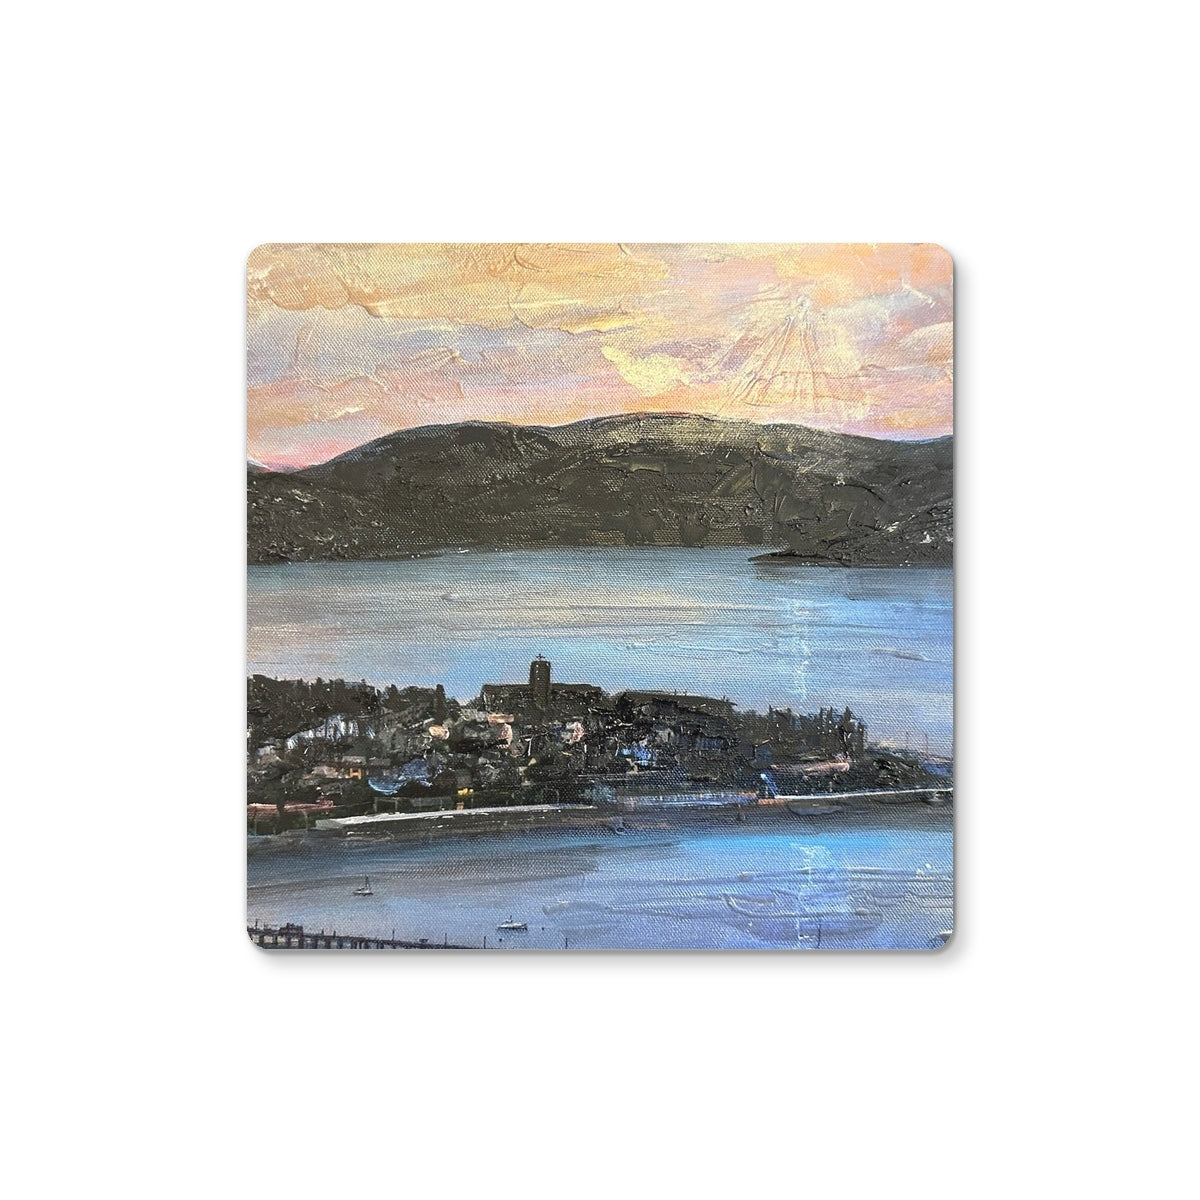 From Lyle Hill Art Gifts Coaster-Coasters-River Clyde Art Gallery-2 Coasters-Paintings, Prints, Homeware, Art Gifts From Scotland By Scottish Artist Kevin Hunter